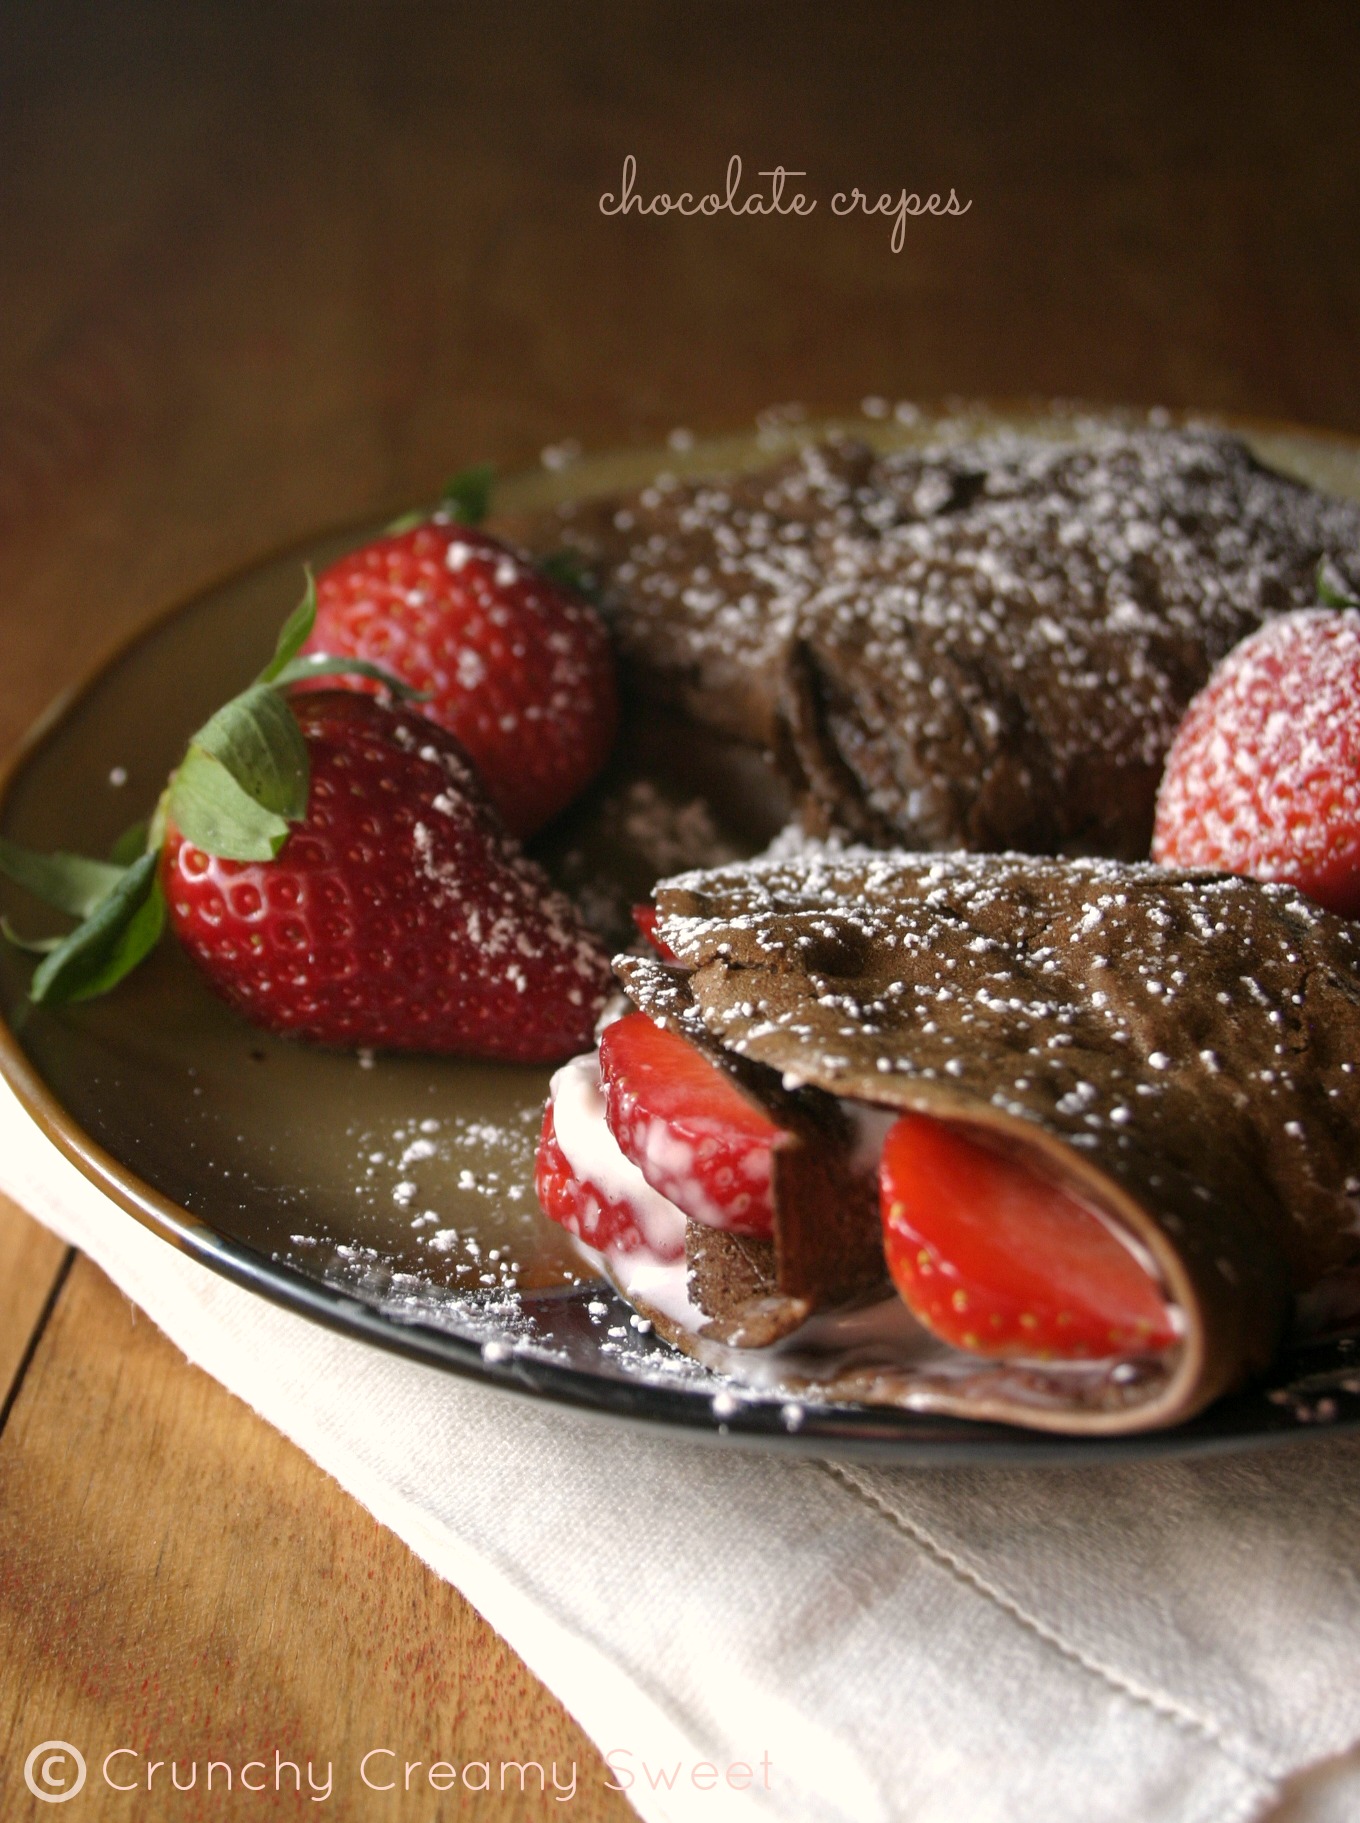 Chocolate crepes with strawberries